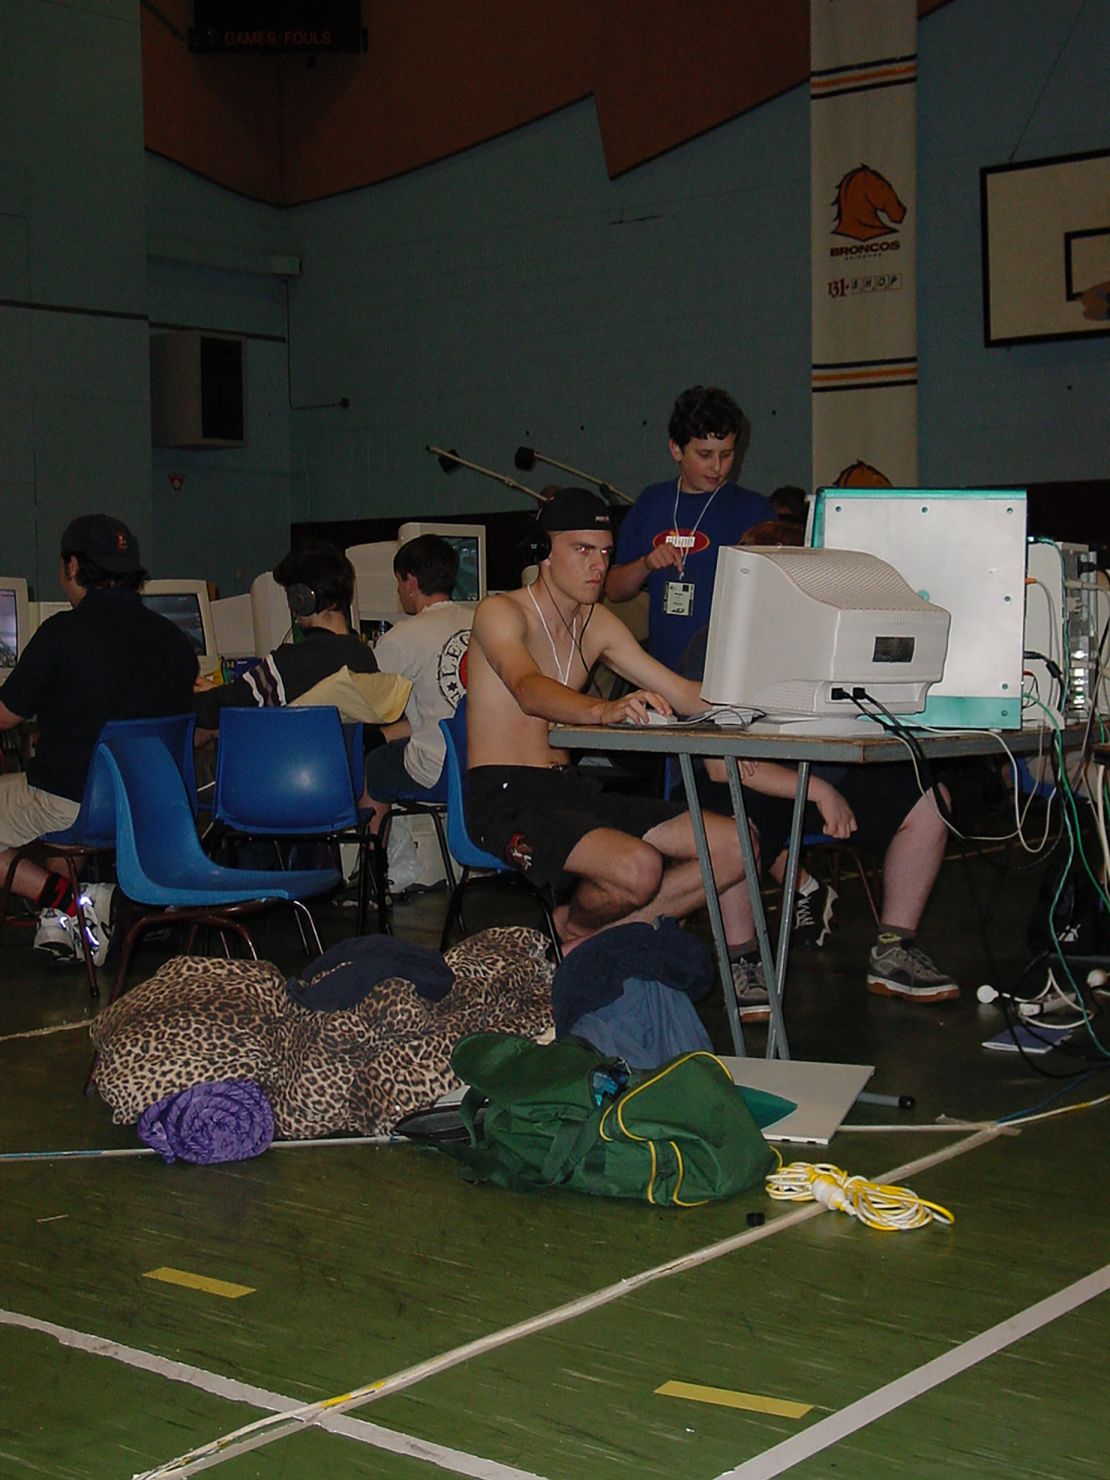 Gamers prepared for the long-haul, bringing sleeping bags and blankets to a 2000 tournament in Brisbane, Australia.